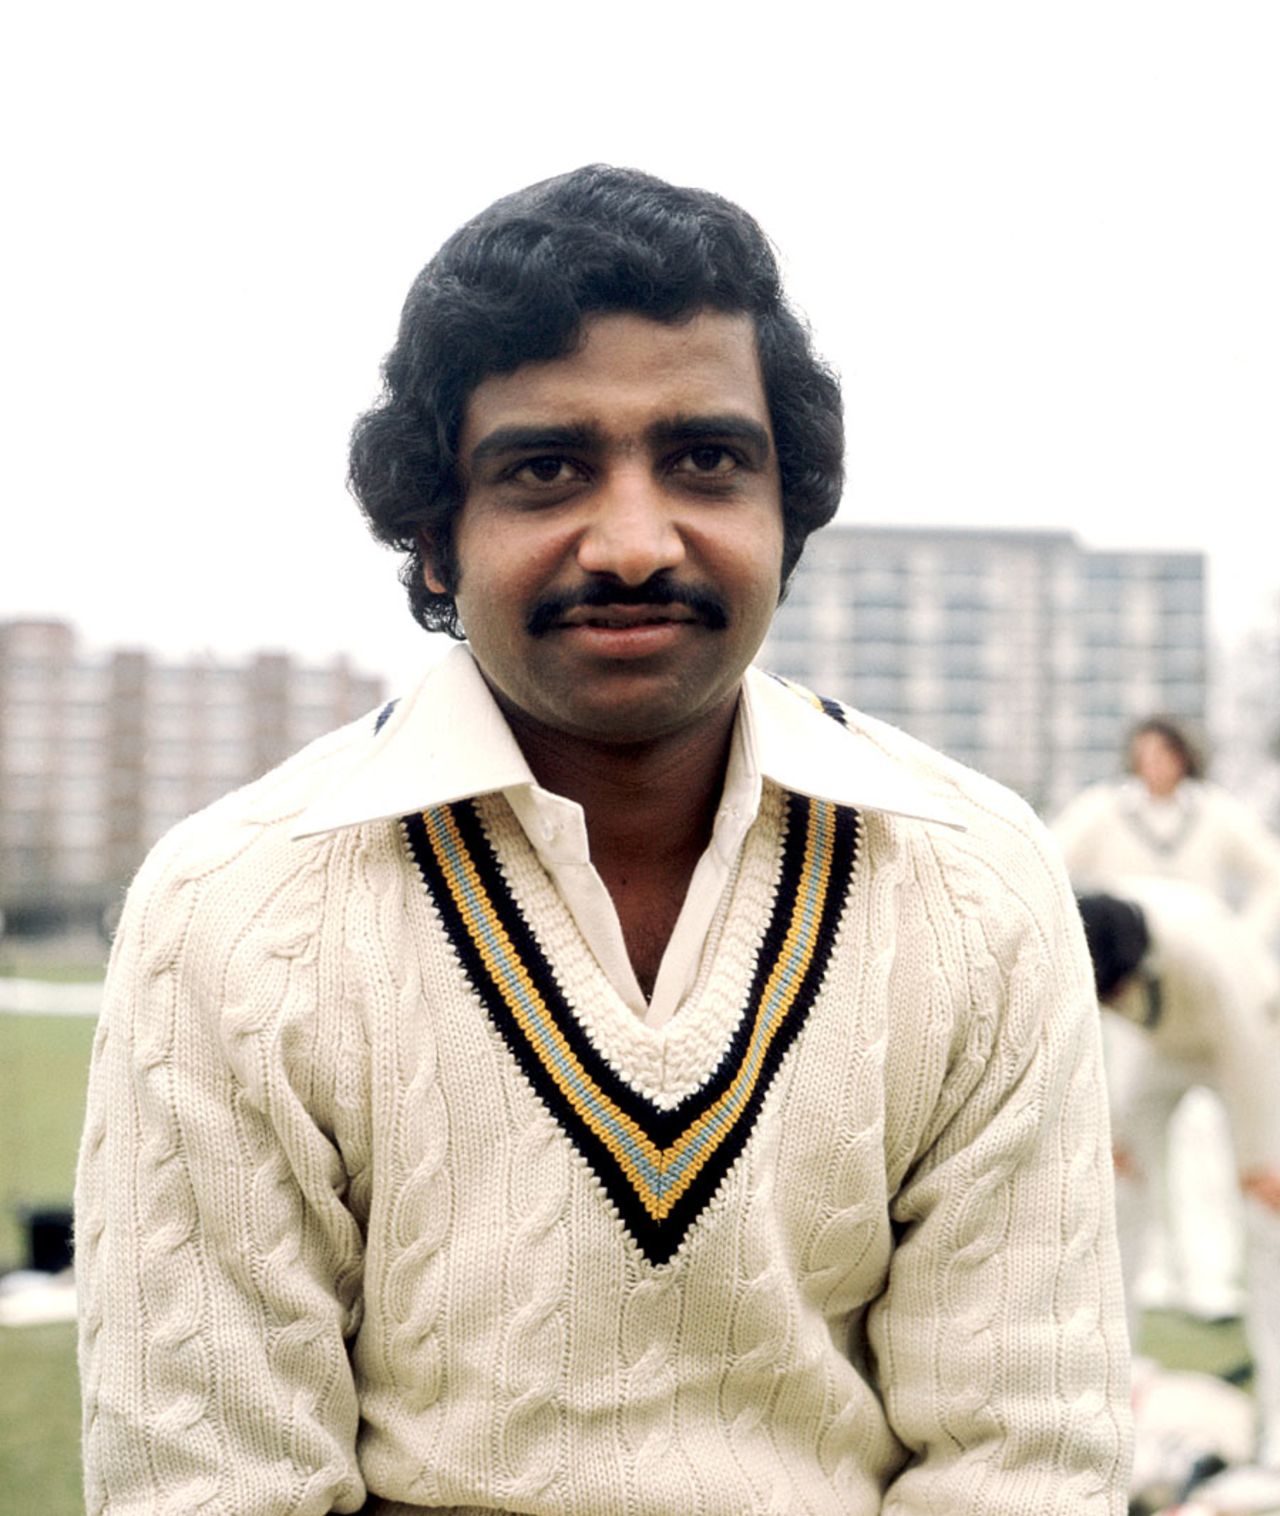 Gundappa Viswanath poses for a photo during nets, Eastbourne, April 20, 1974